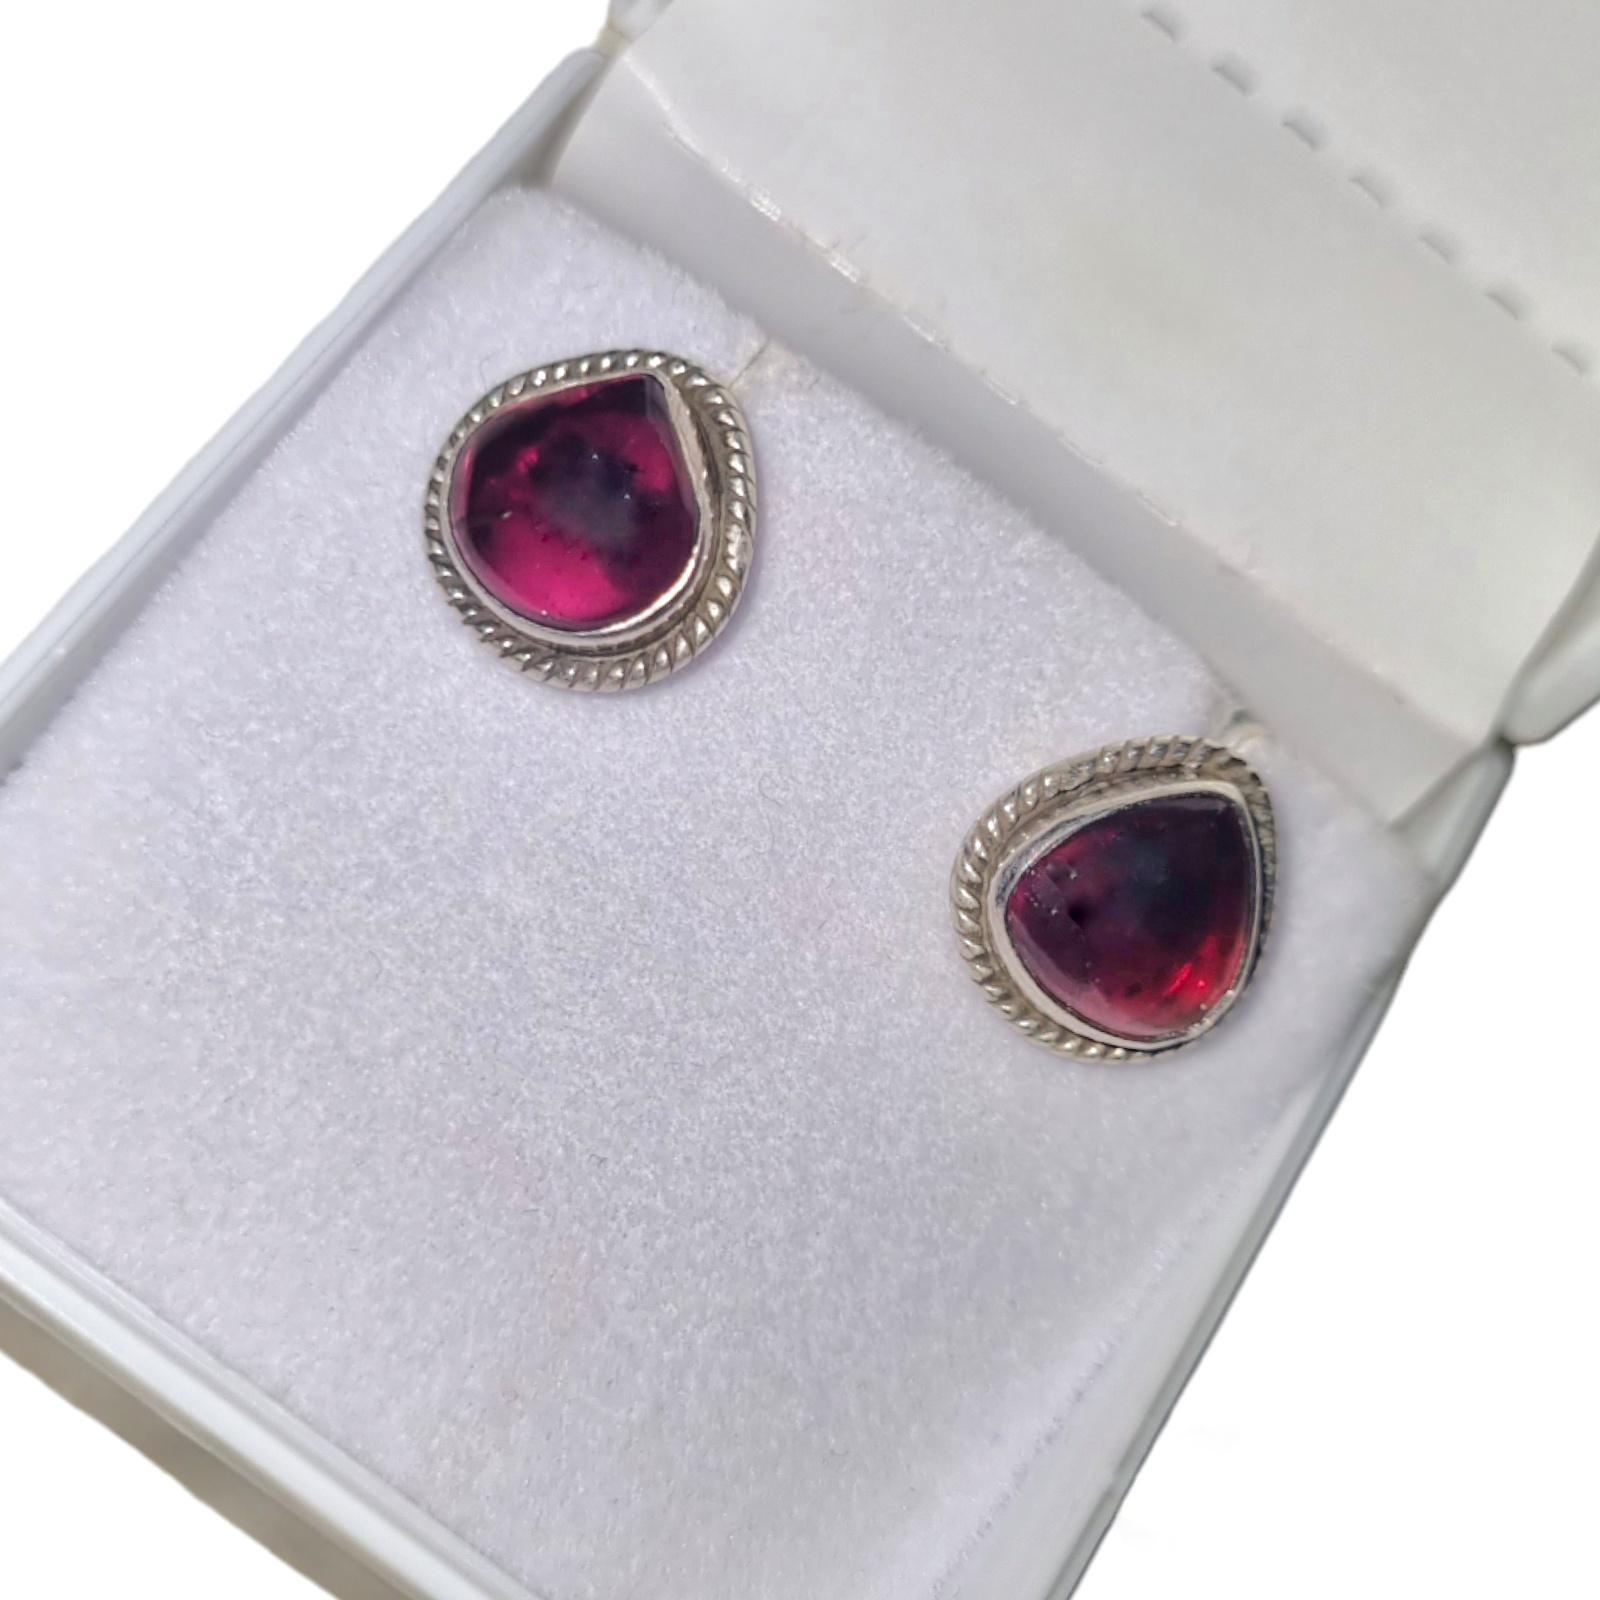 Metal - Sterling silver
Gross Weight - 3.95 Grams
Gemstones - Natural Garnet

Elevate your style with the timeless beauty of these Natural Garnet Earrings in Sterling Silver. These exquisite earrings are a perfect blend of elegance and